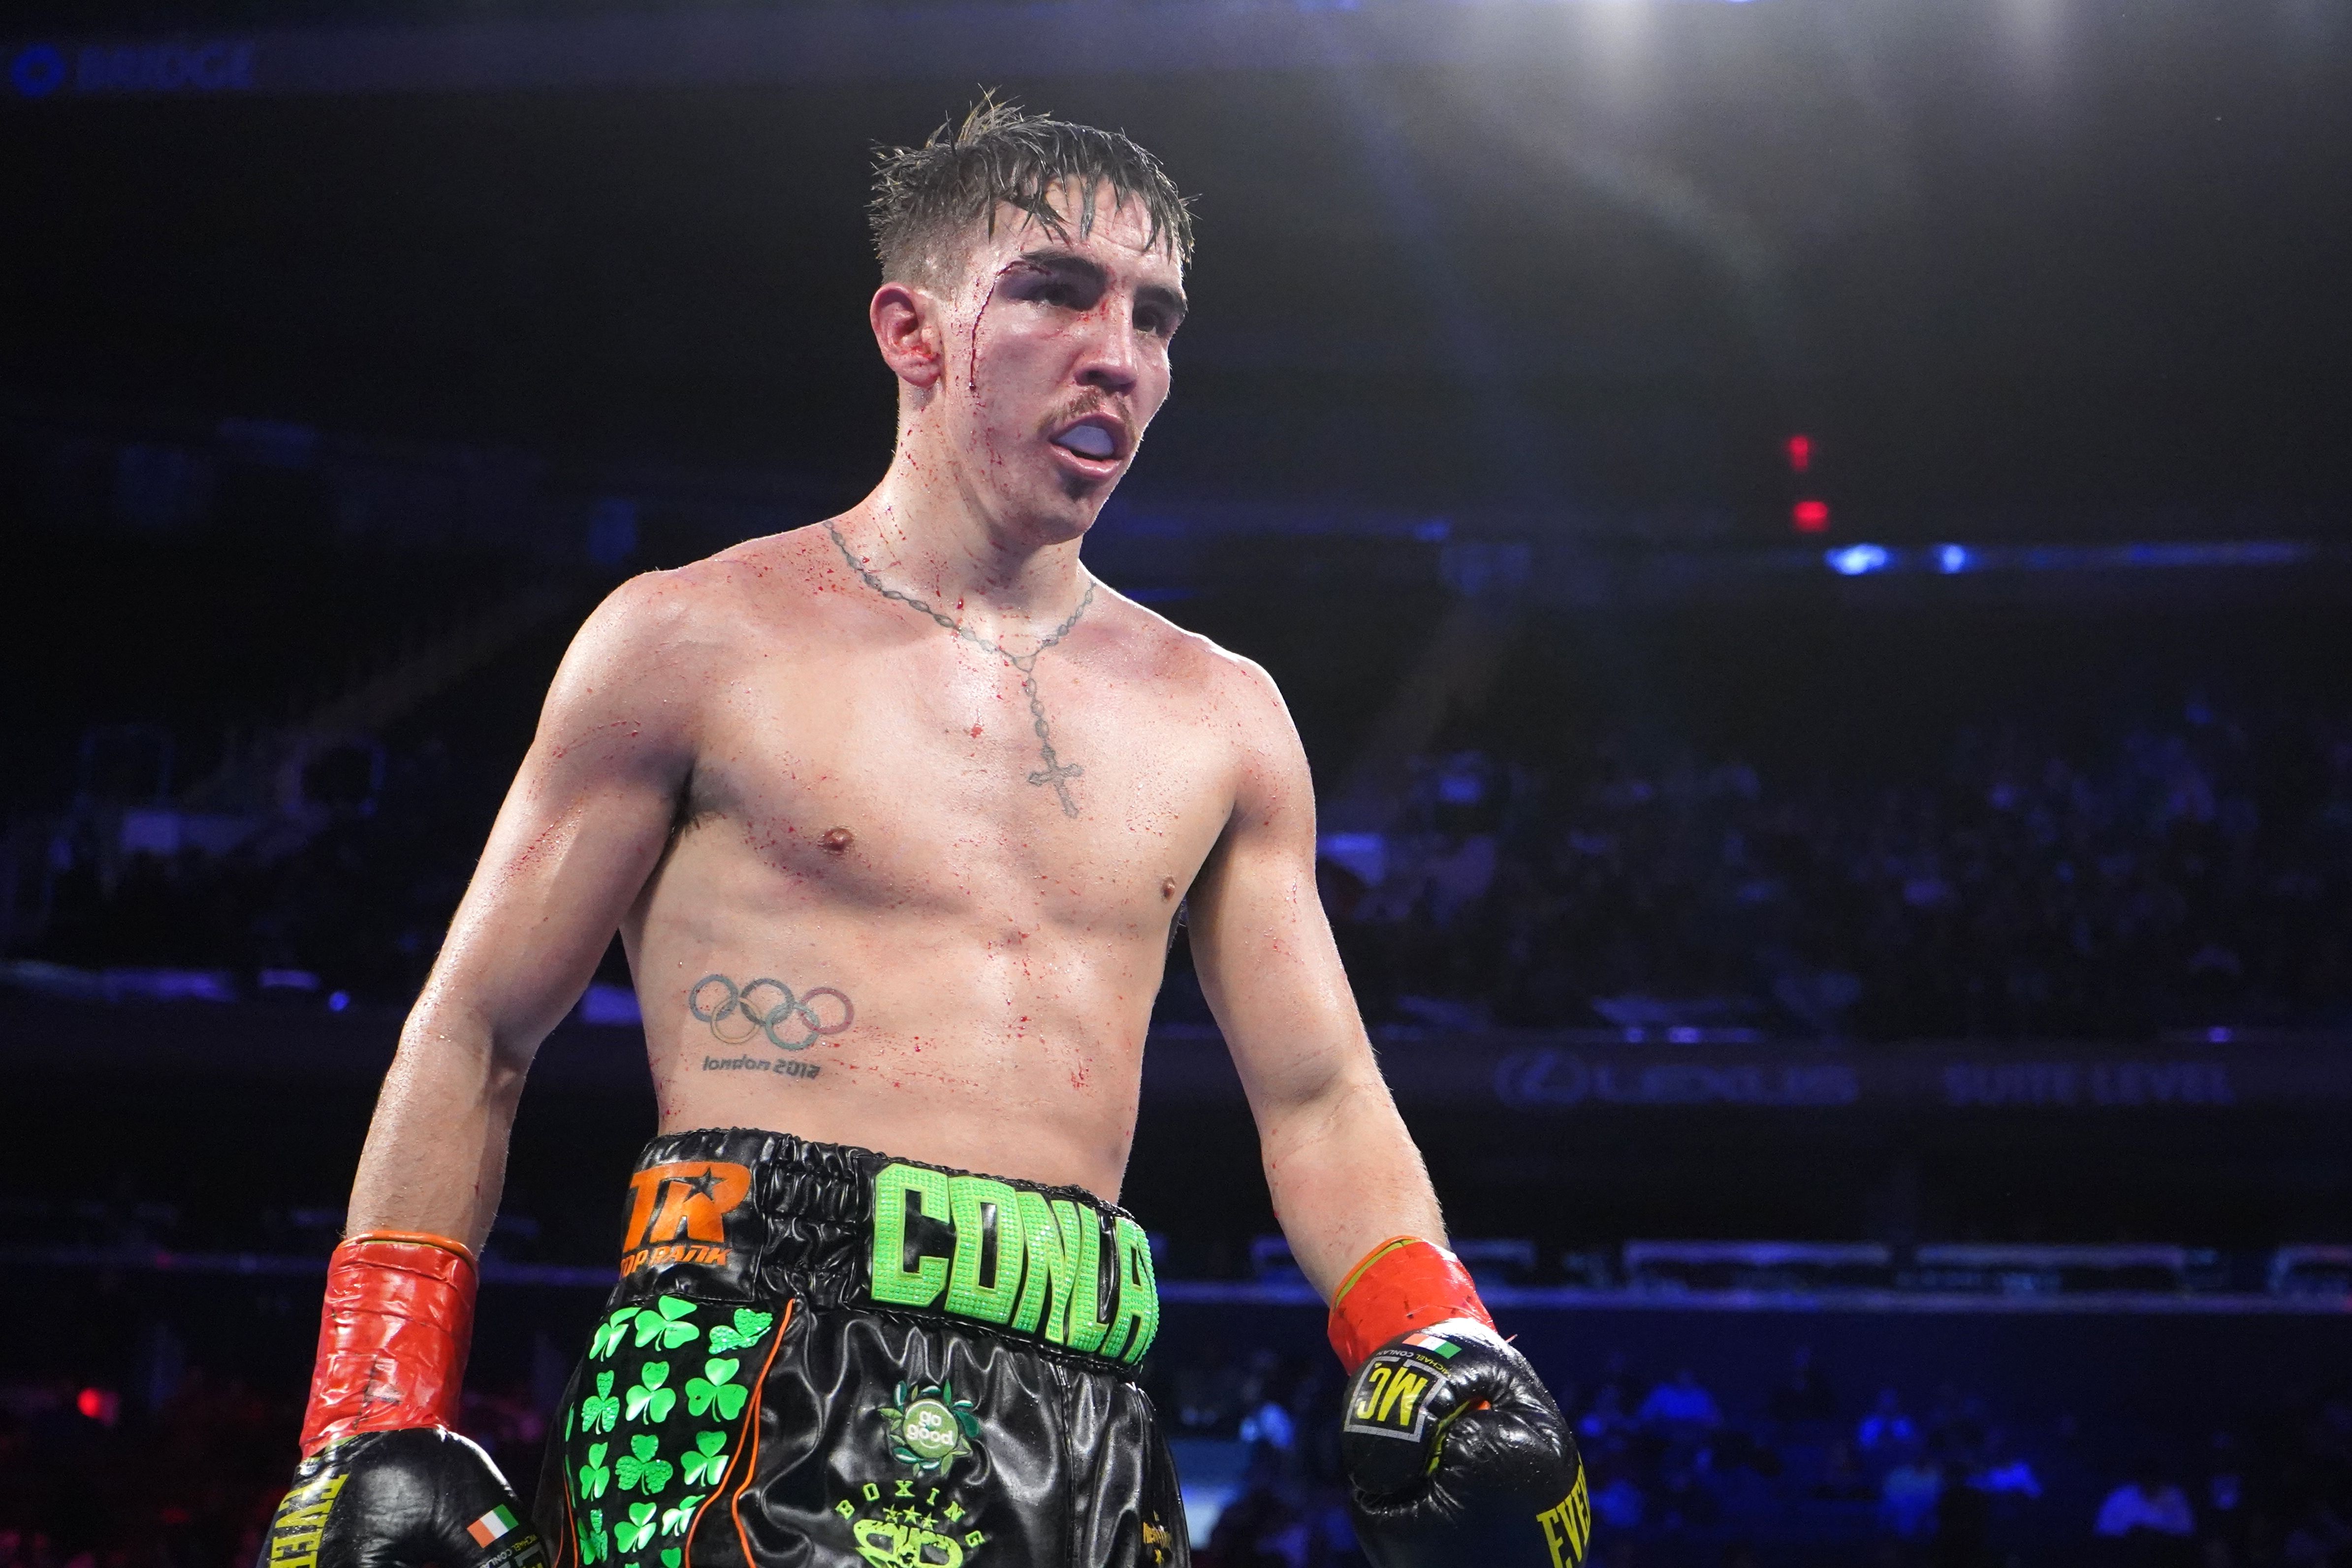 Michael Conlan says he is fully confident he will dethrone WBA featherweight champion Leigh Wood when they meet next year